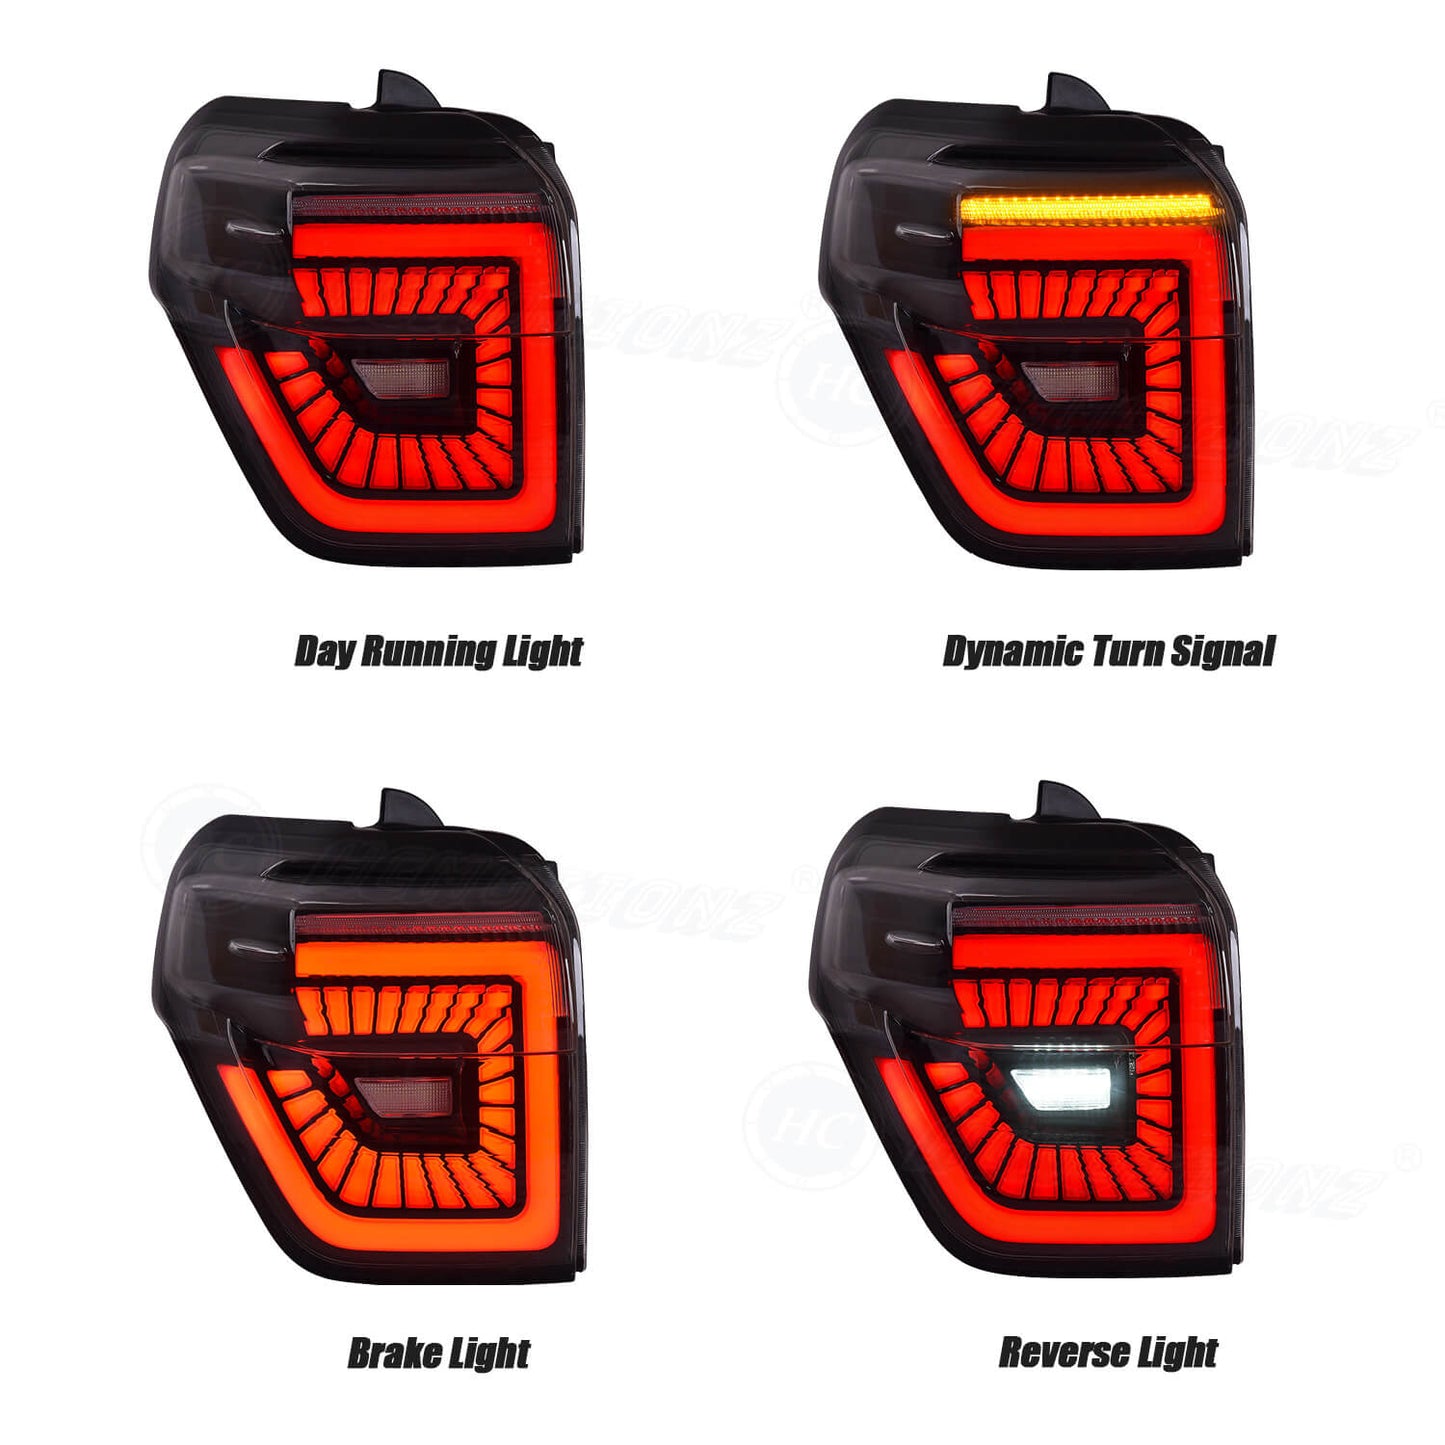 HCMOTION LED Tail Lights for Toyota 4Runner 2010-2023 SR5 TRD Off Road Lmited